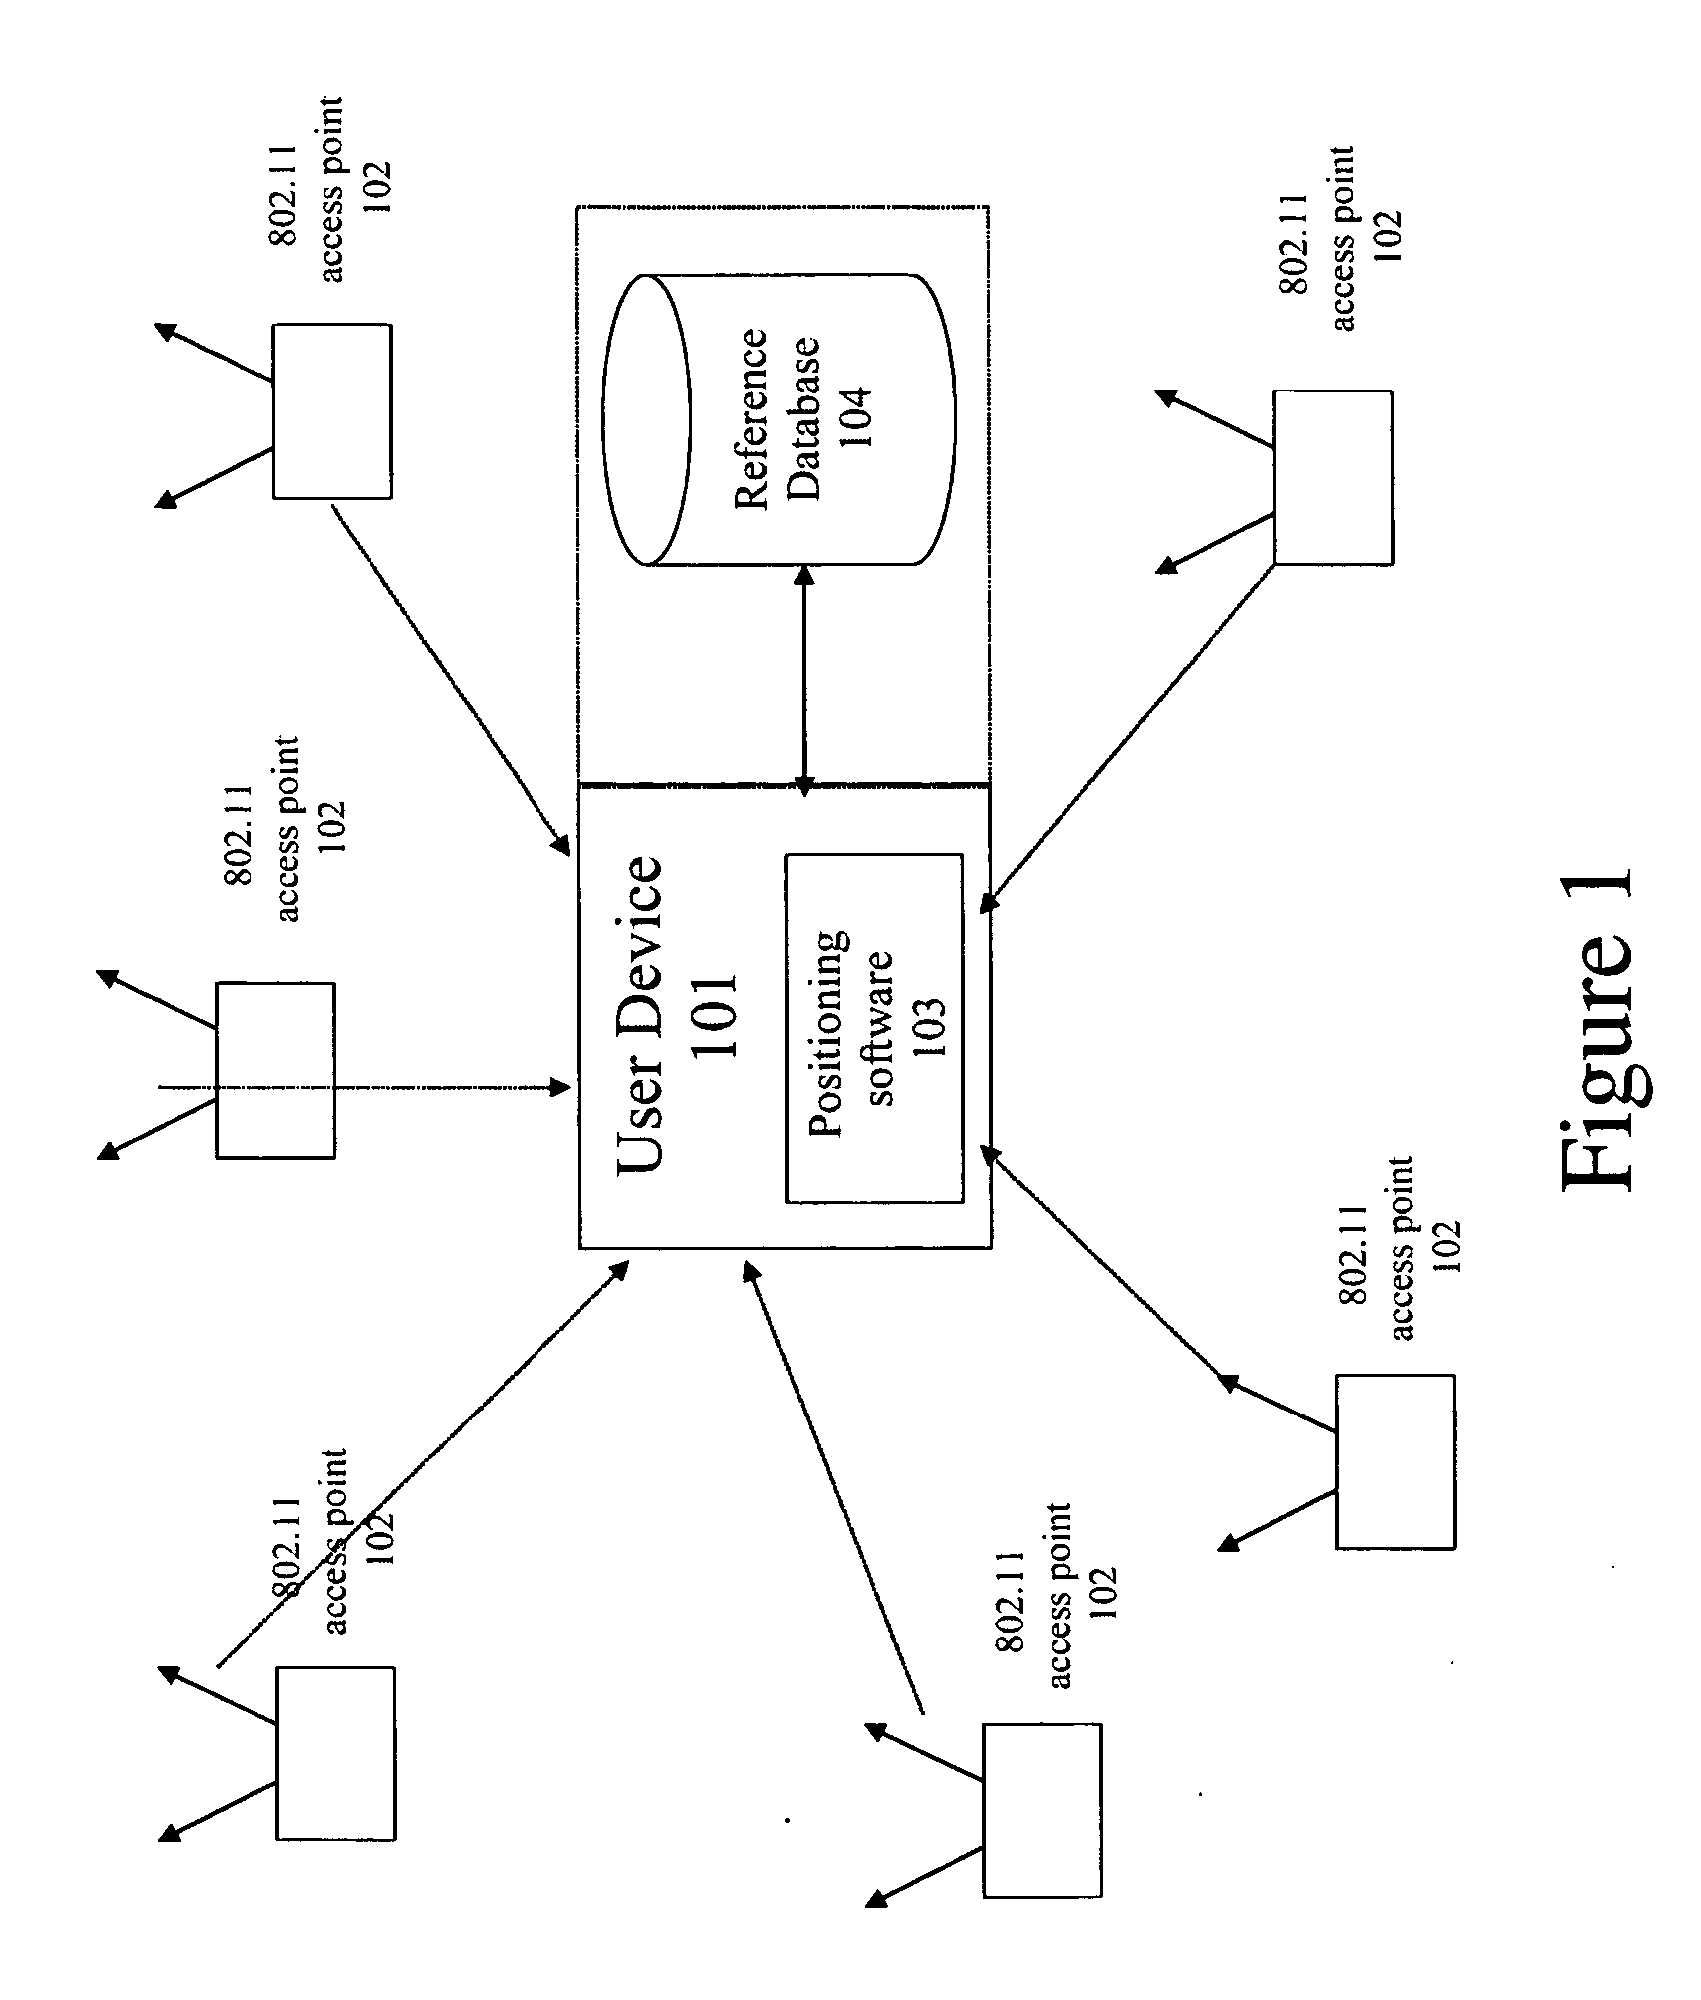 Methods of filtering and determining cofidence factors for reference points for use in triangulation systems based on Wi-Fi access points